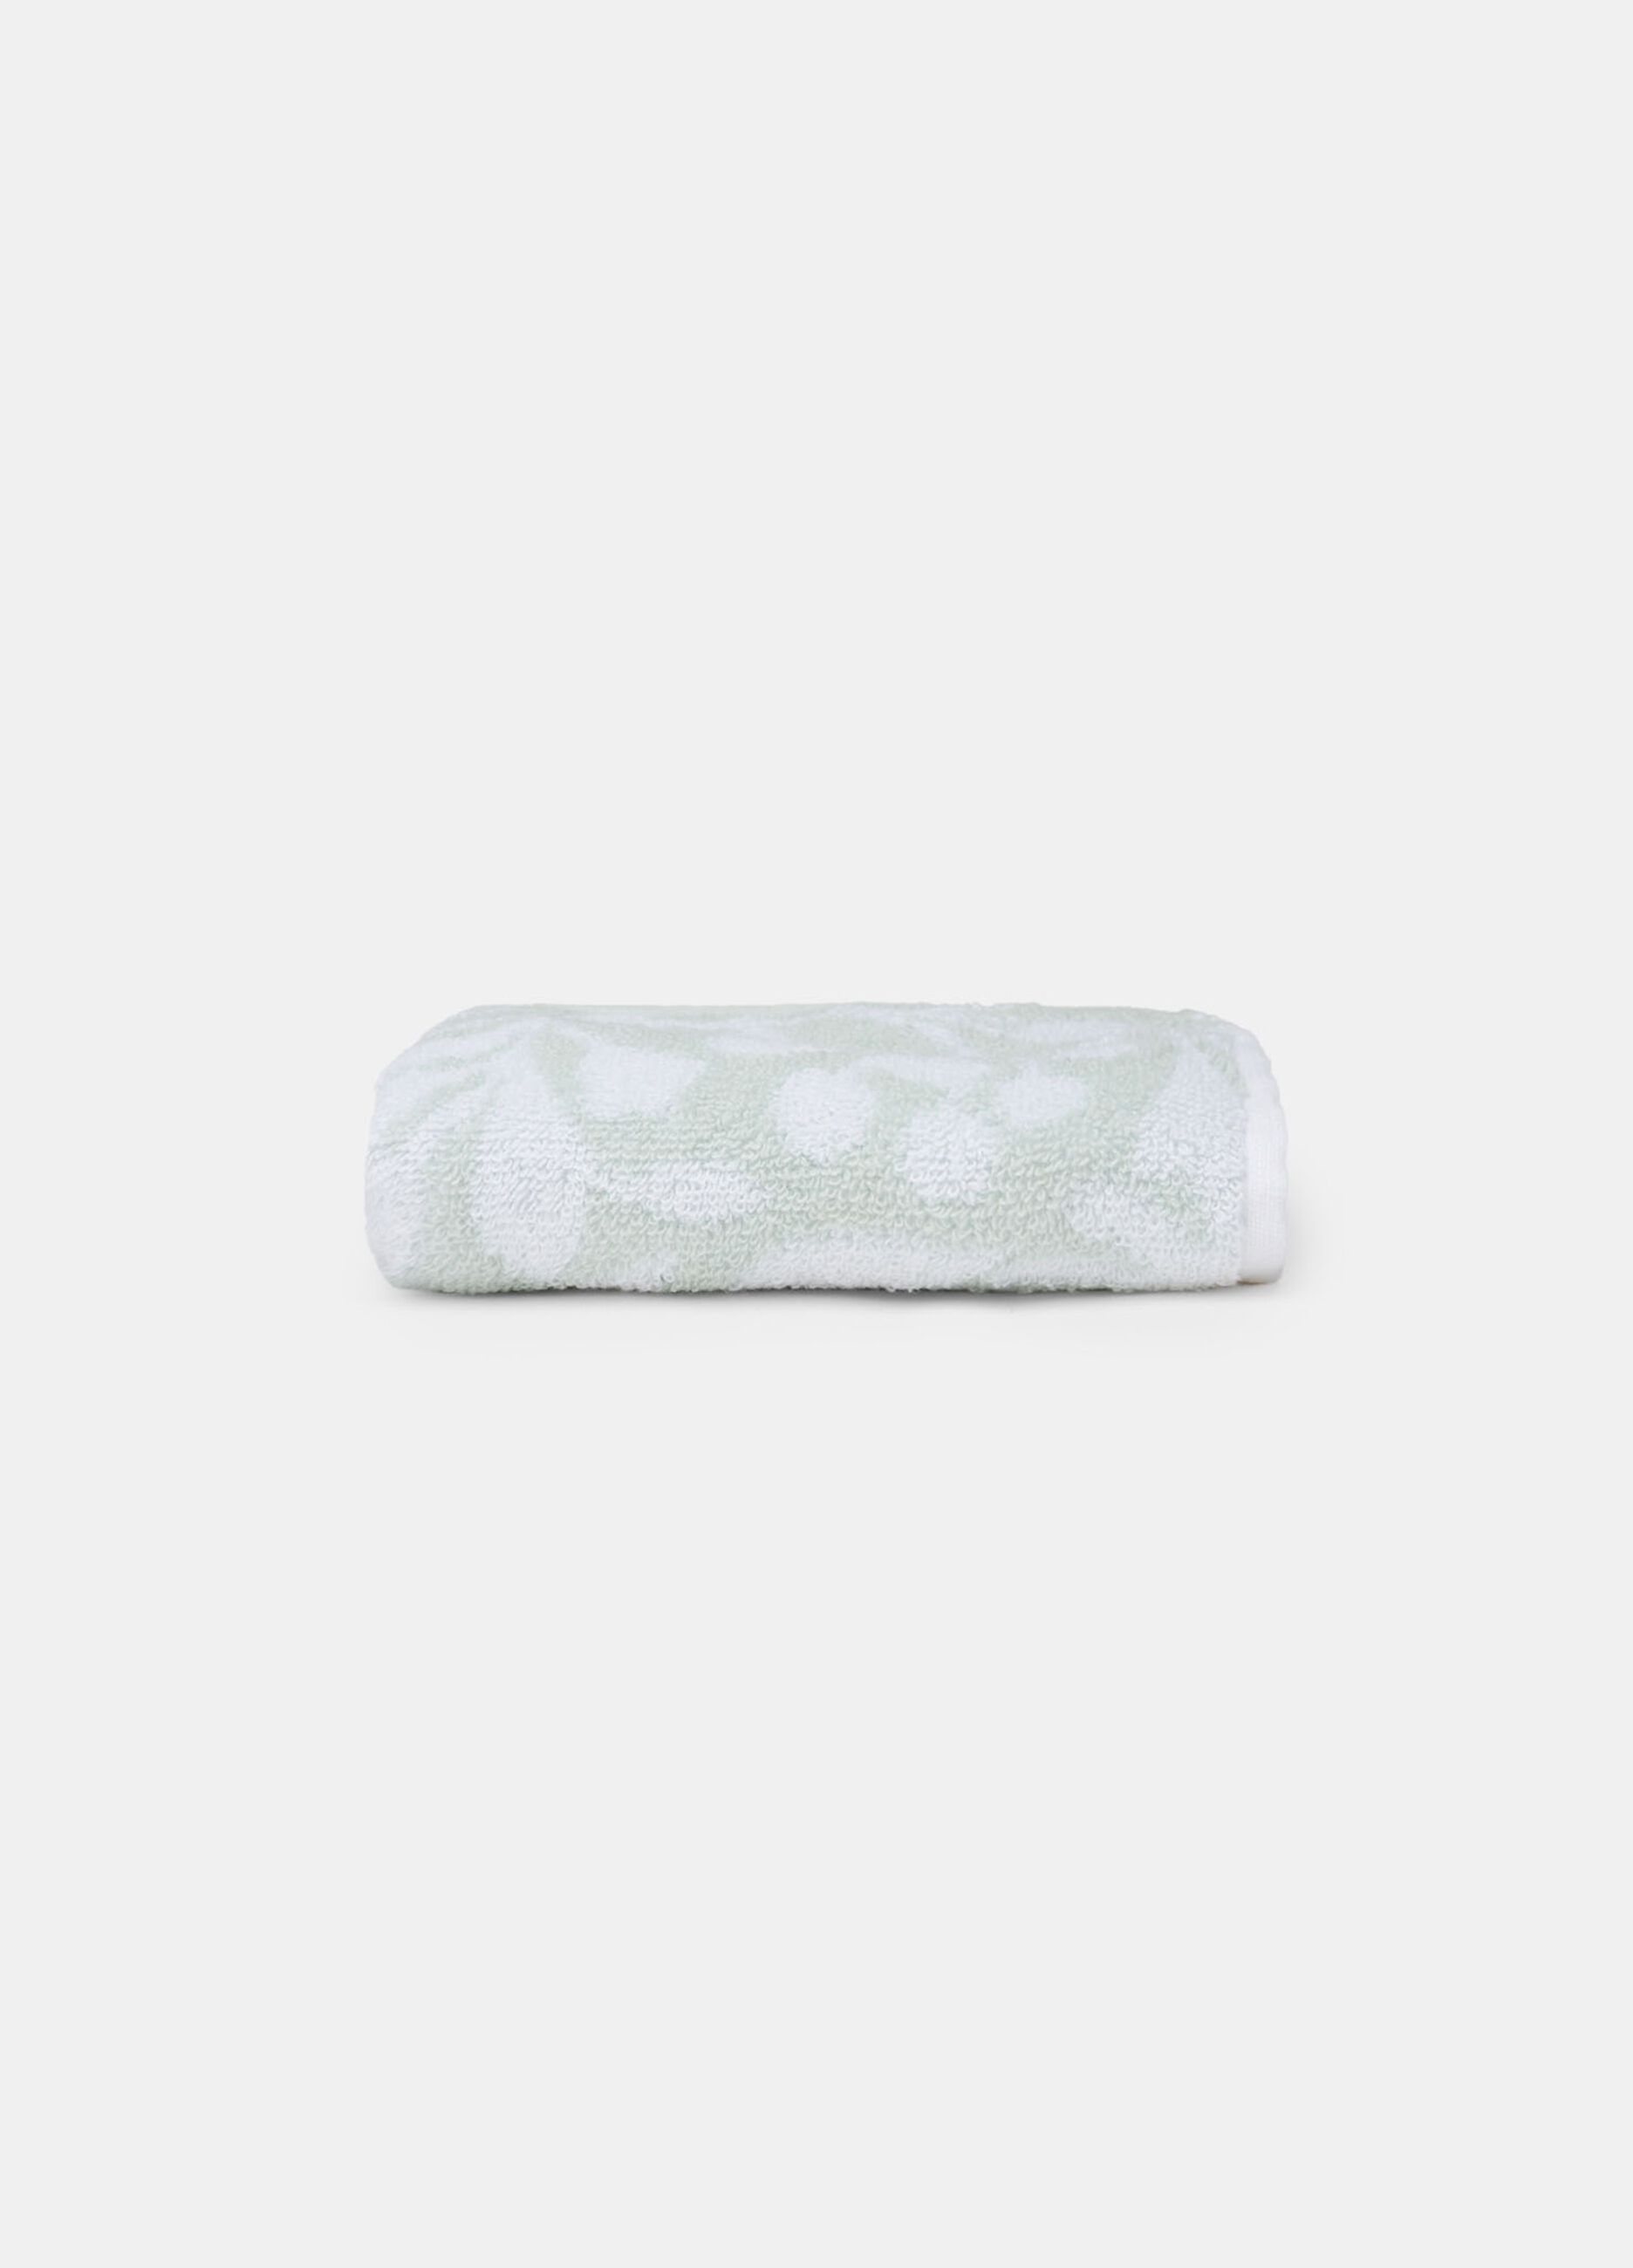 Guest hand towel in cotton